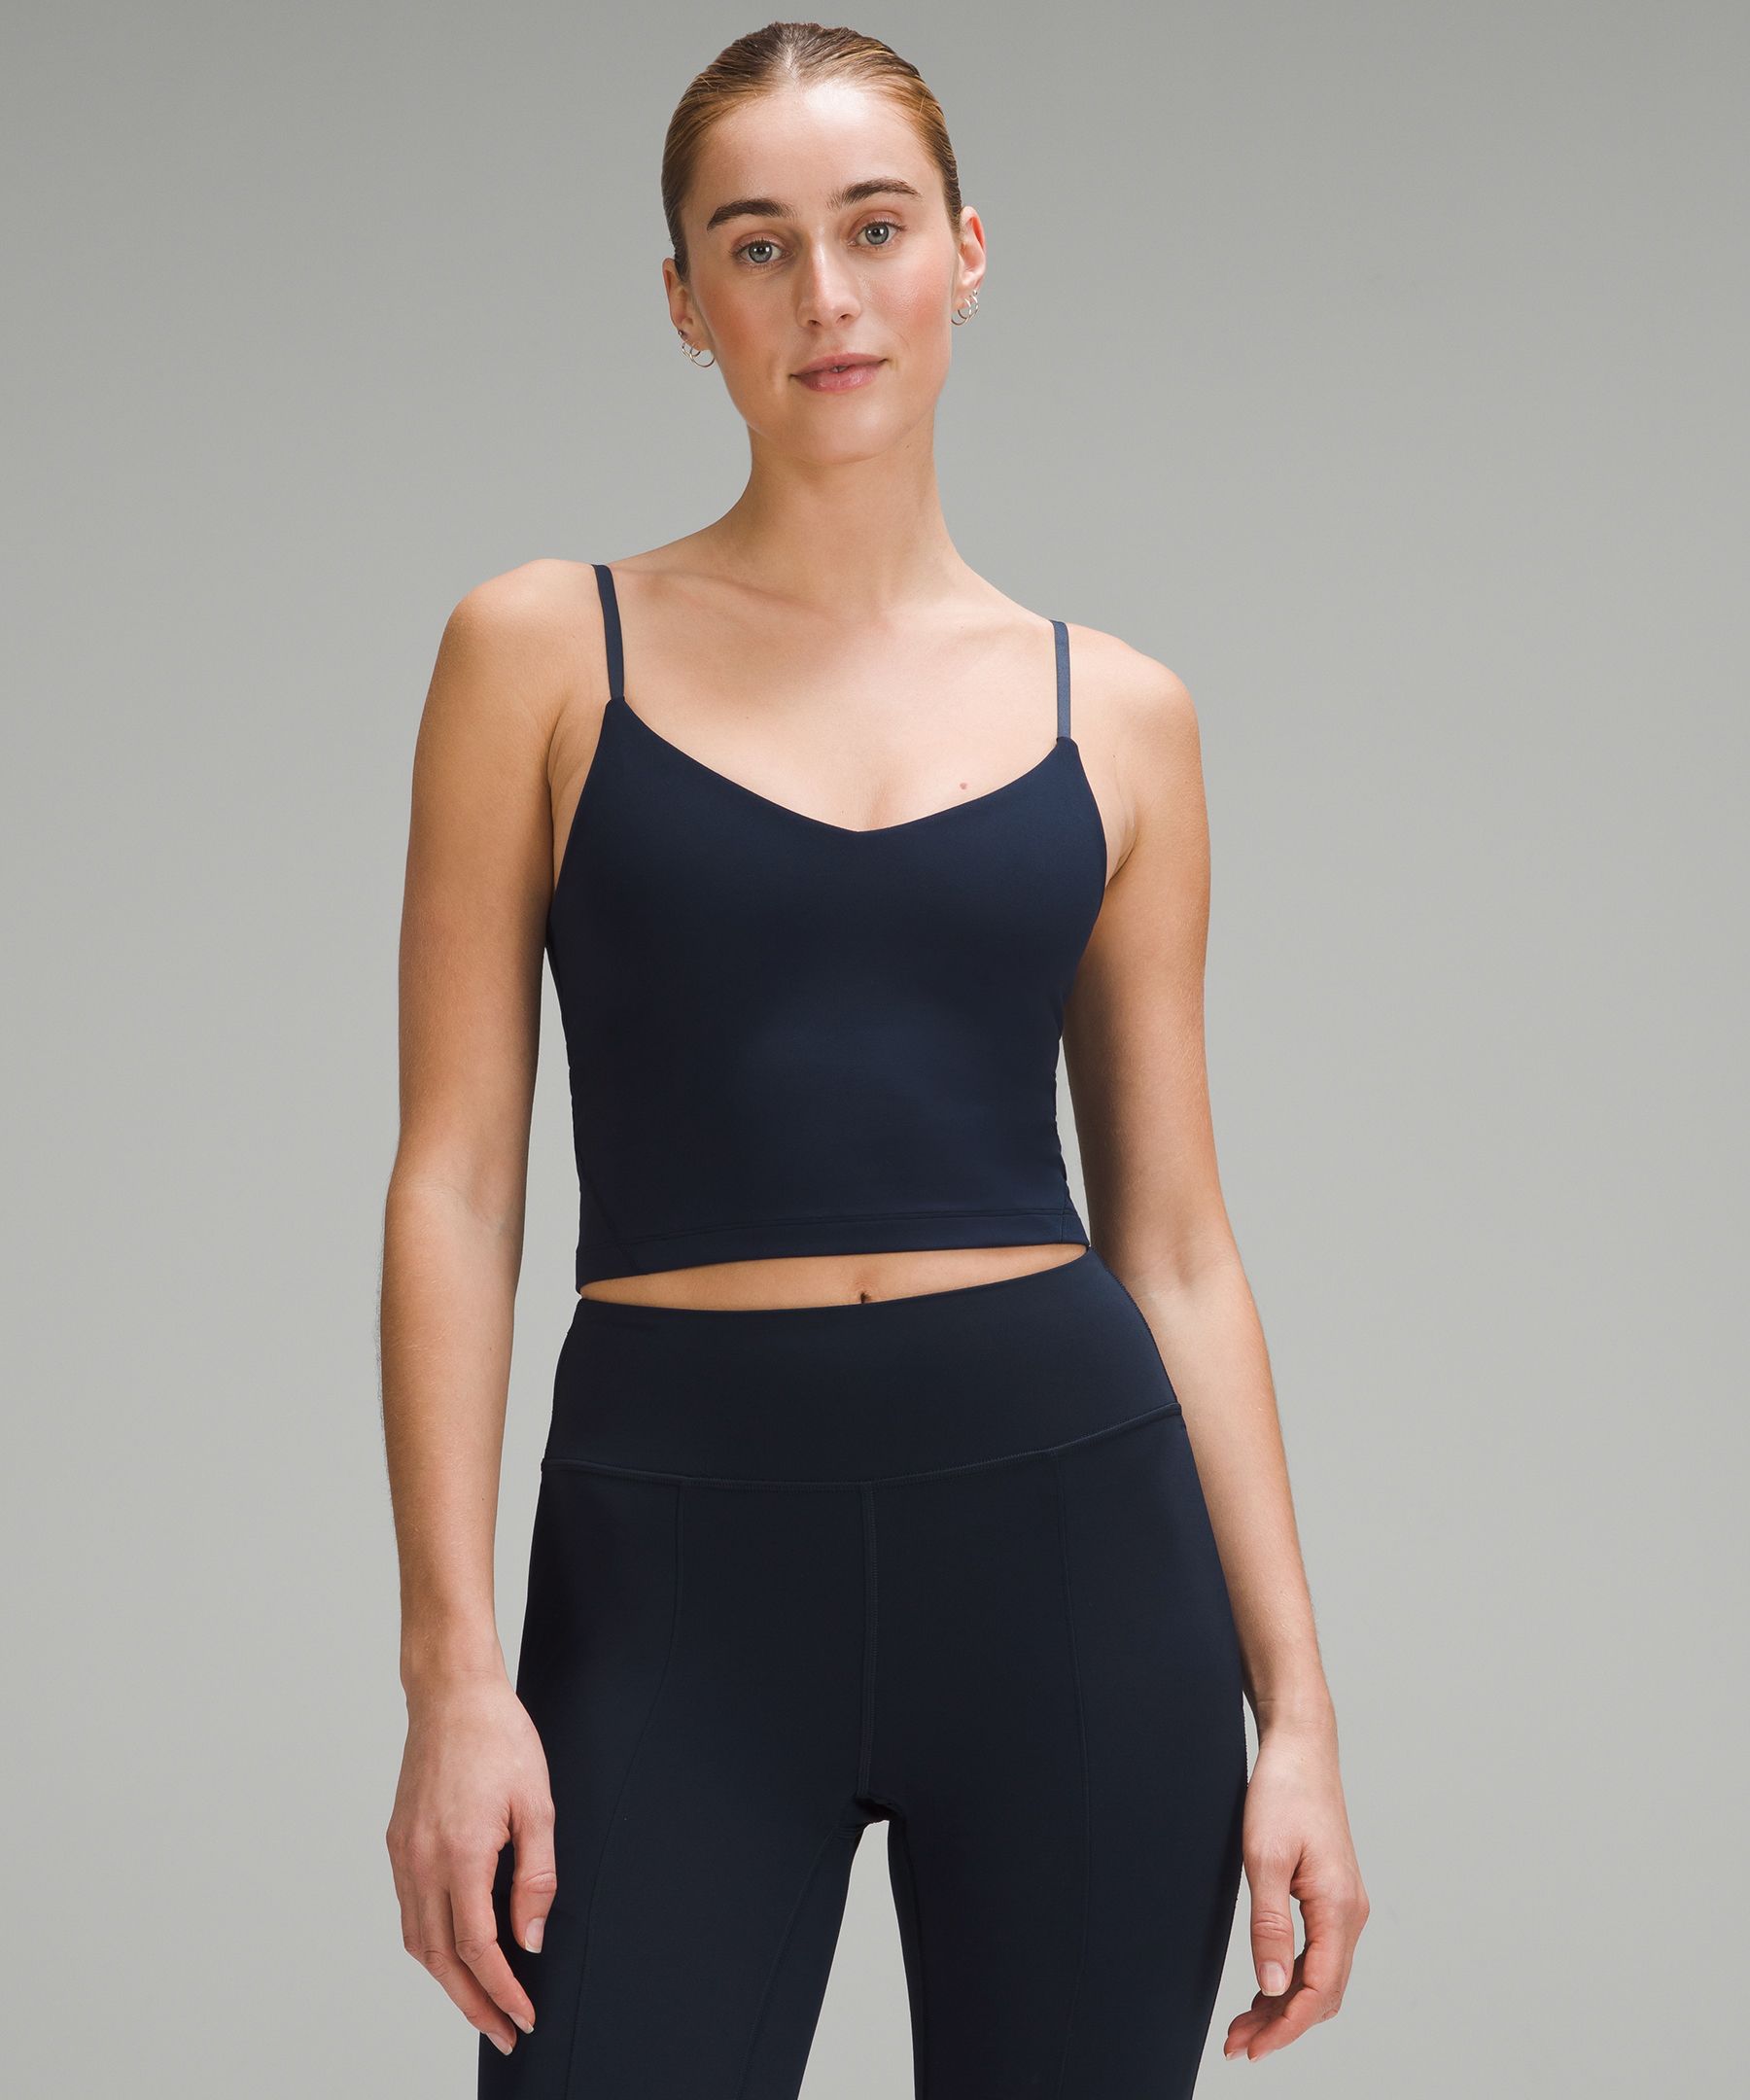 Lululemon Inspire Tights II I'm Midnight Navy, 4 Blue - $38 (61% Off  Retail) - From Kathy